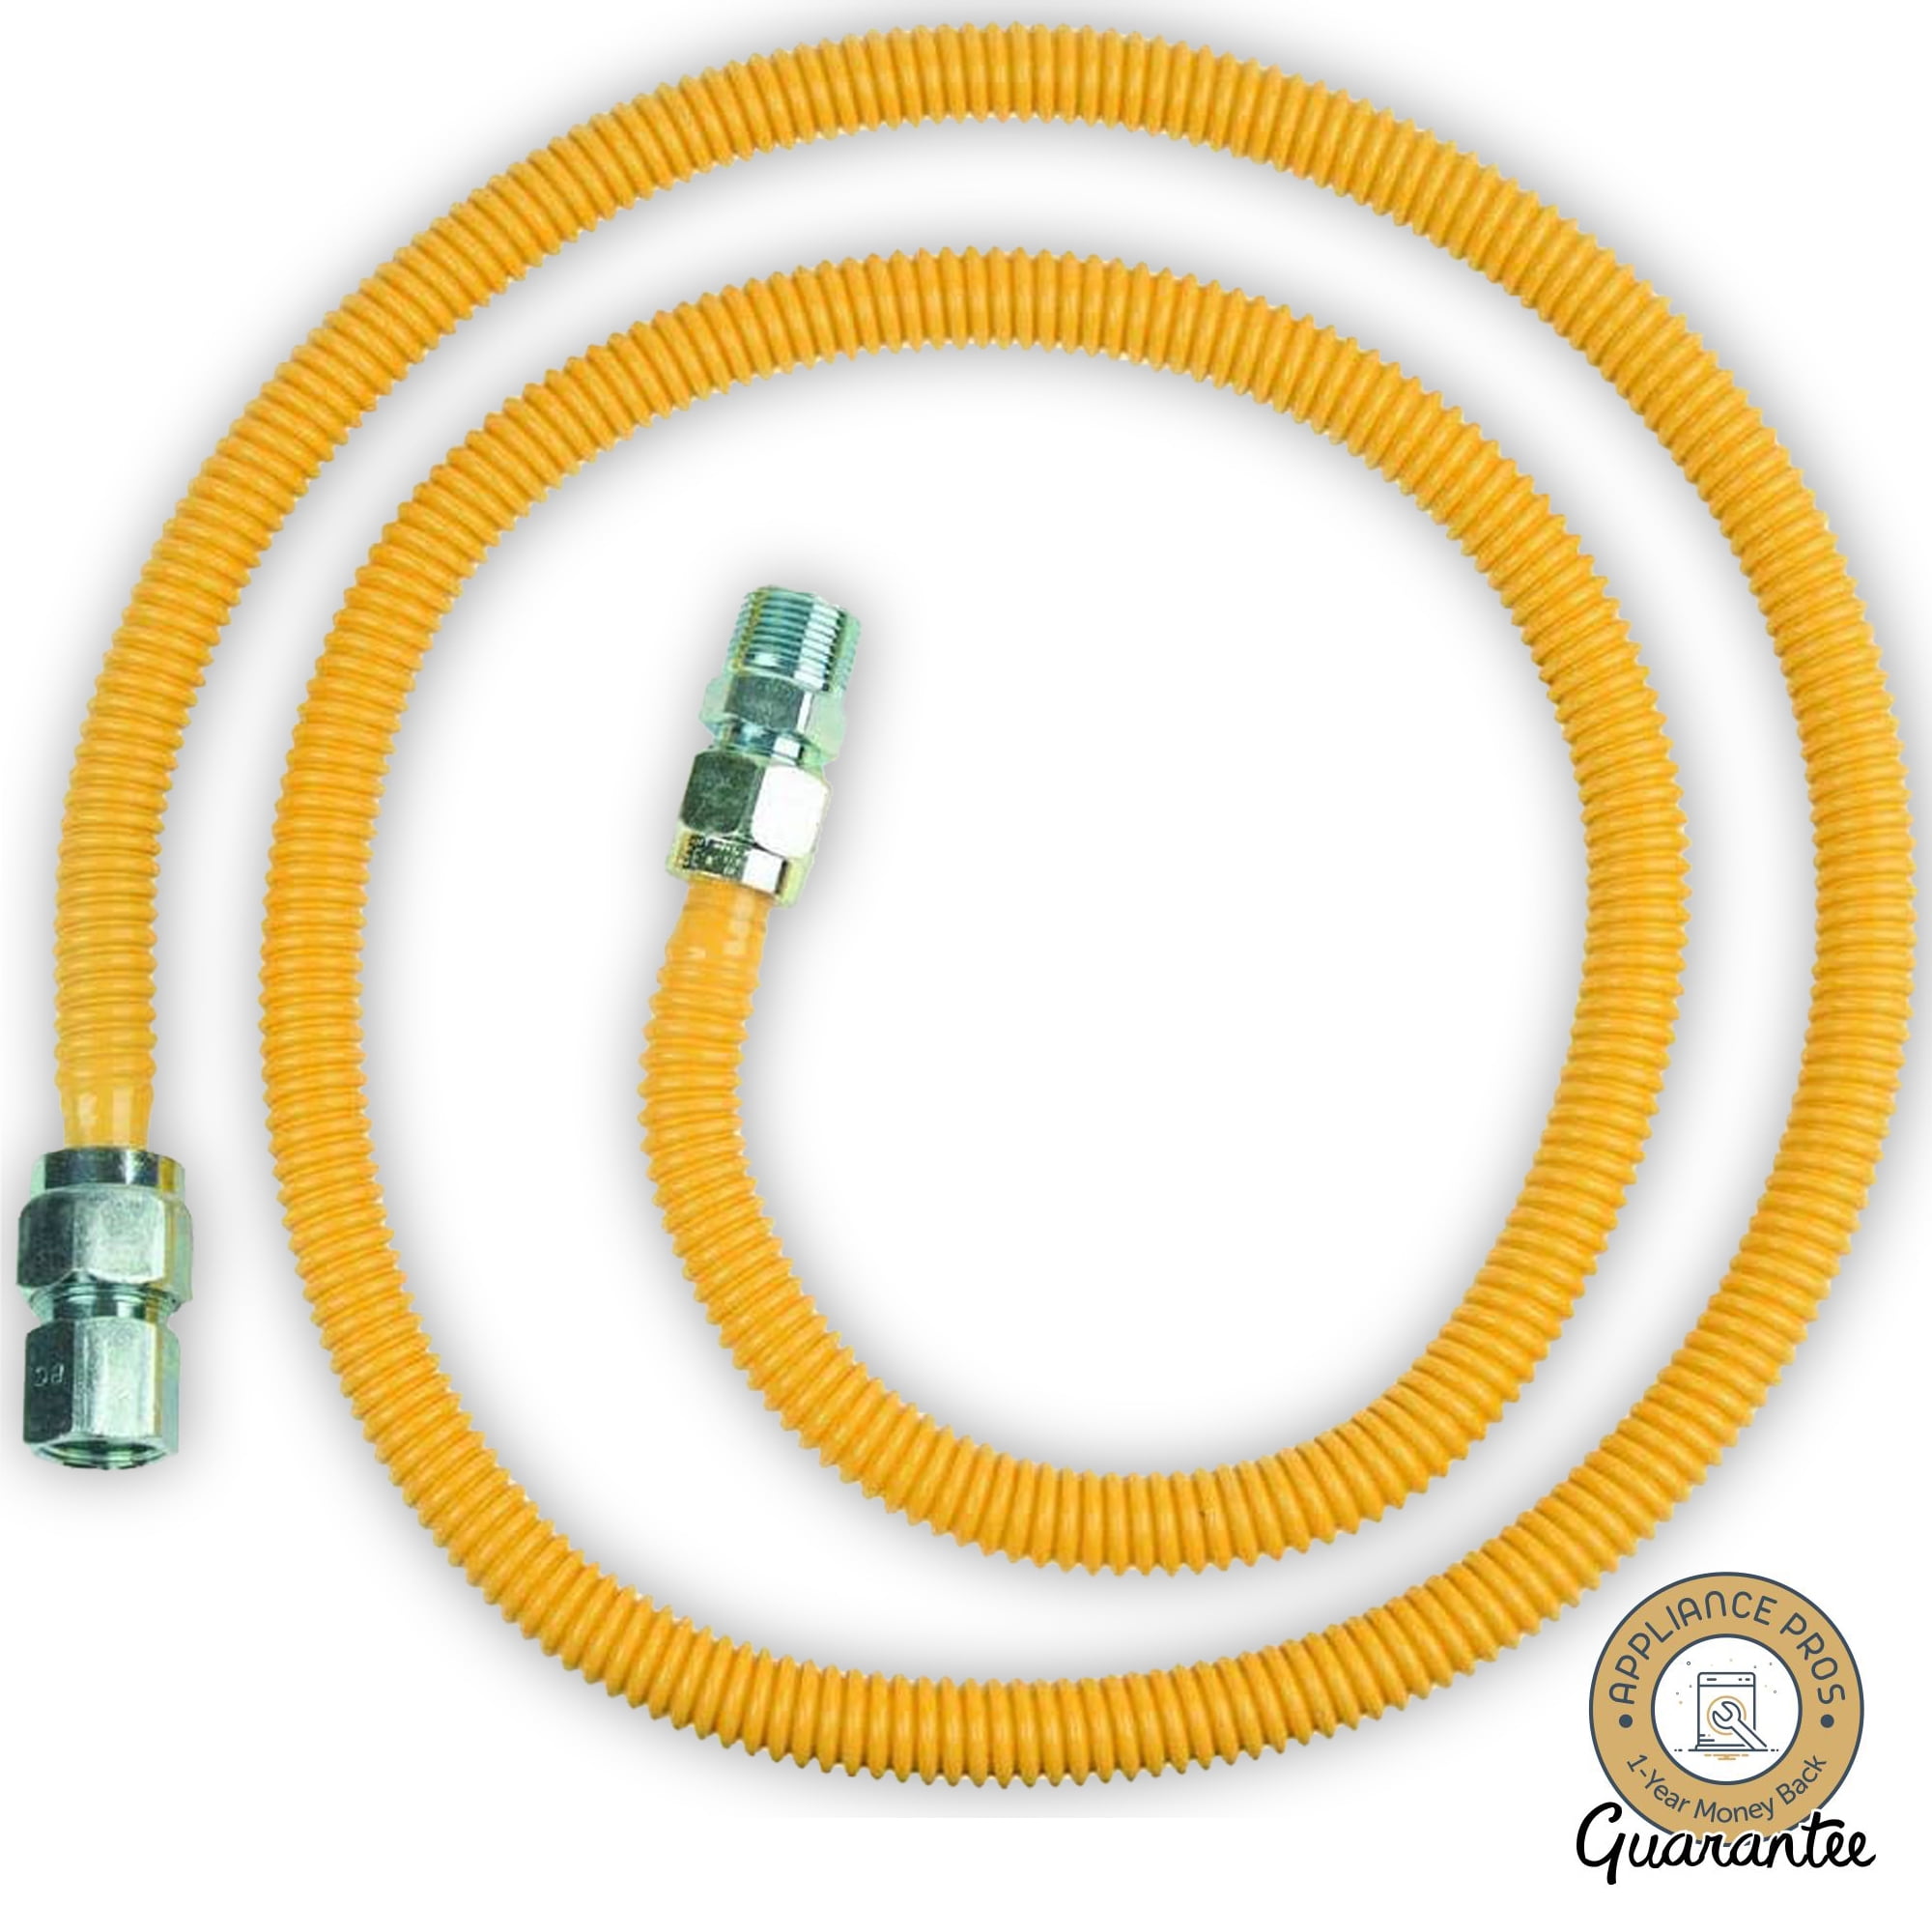 Connector Male & Female Adapters. 3/8" OD 5' Yellow Flex Gas Appliance Hose 